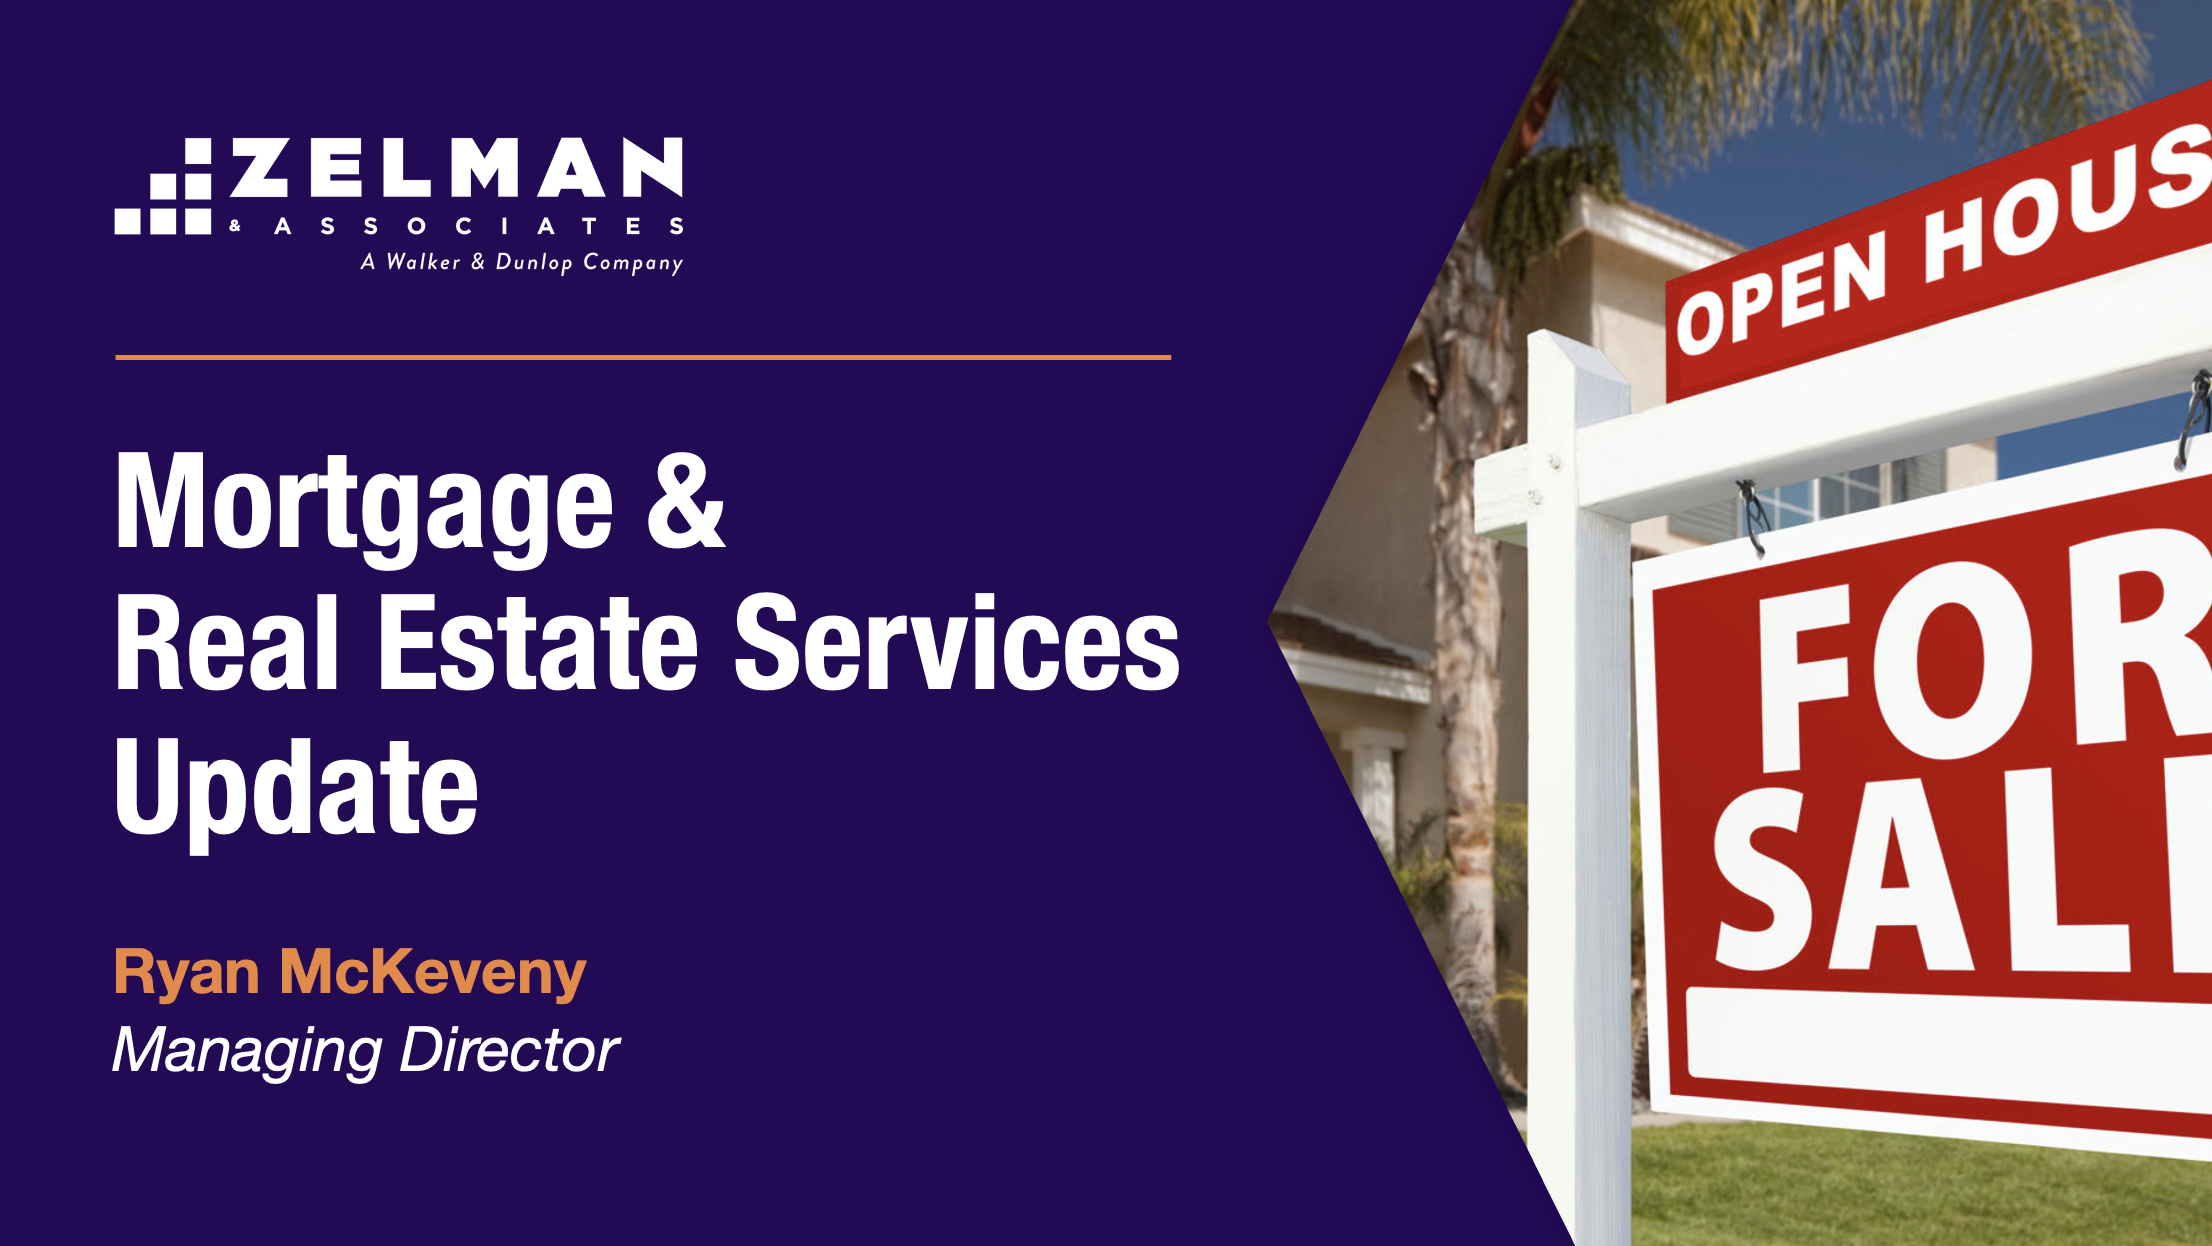 Mortgage & Real Estate Services Update